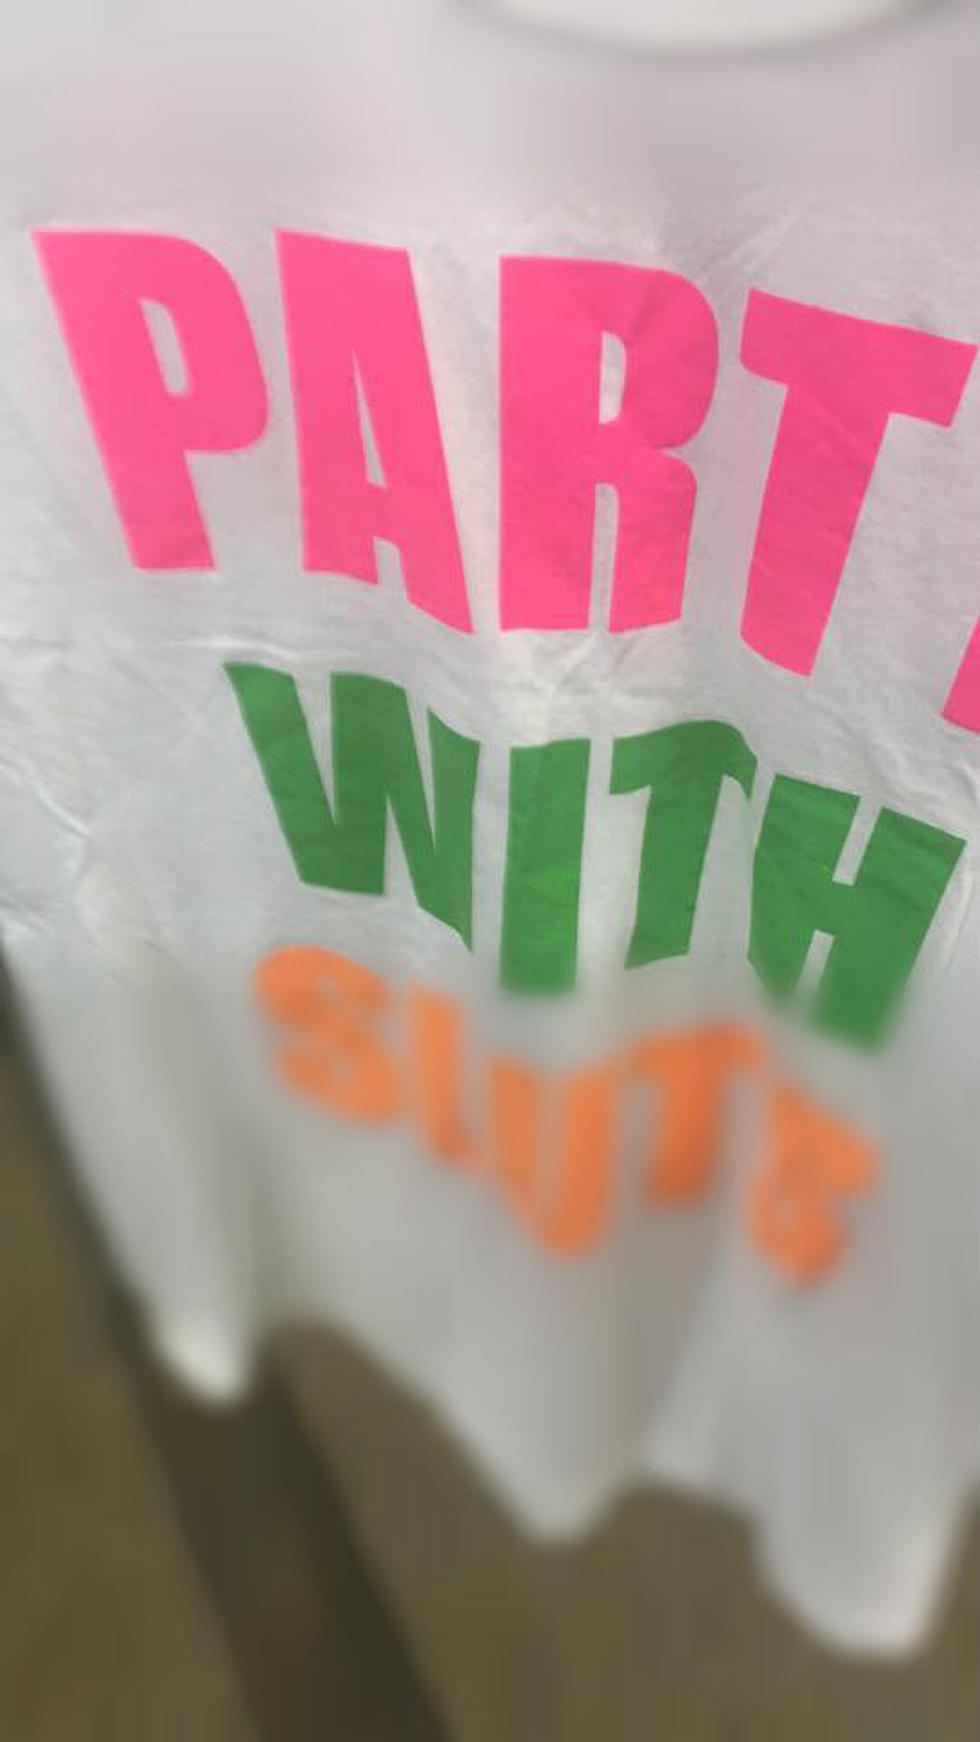 UPDATE: Lapeer Resale Shop ‘Party’ Shirt Finds a Home — Sense of Humor is Alive & Well